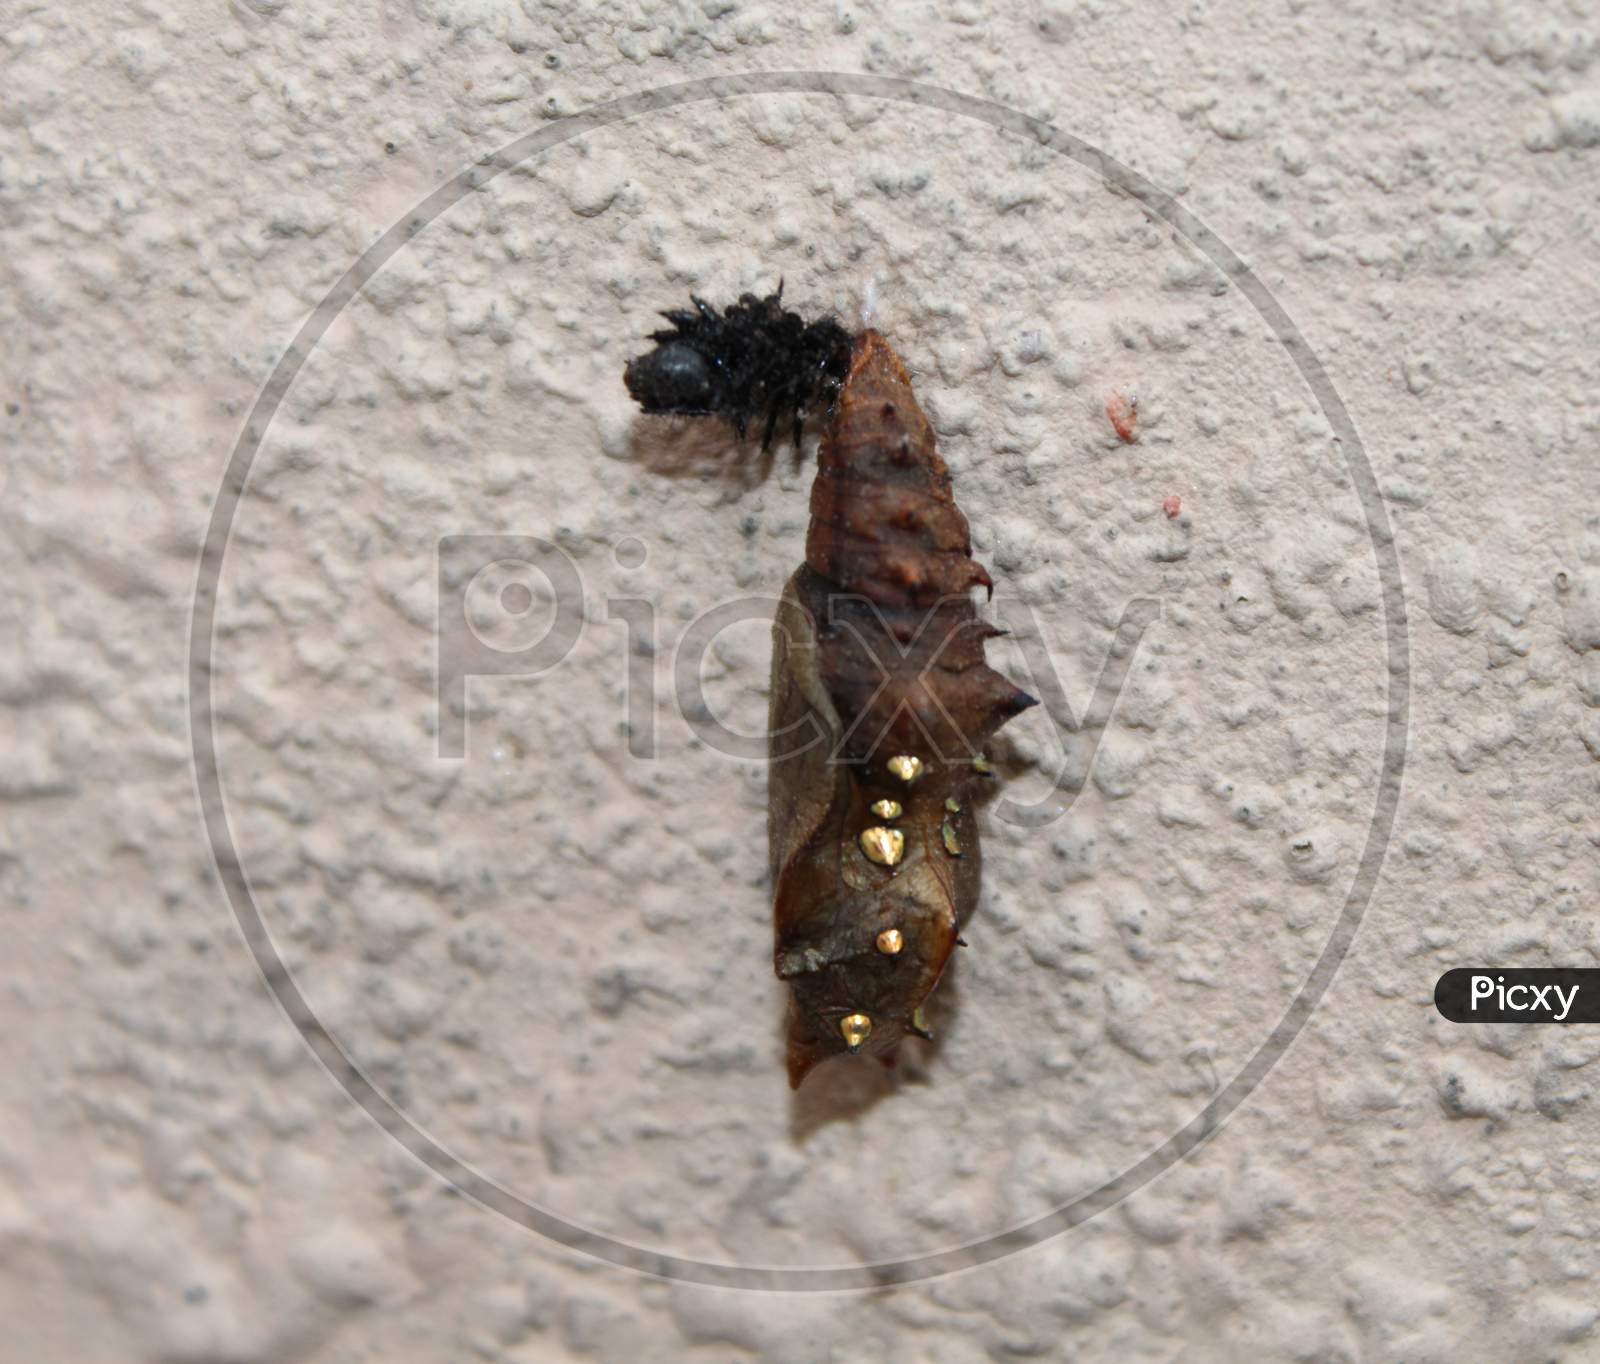 pupae of a butterfly sticking on a rough wall surface